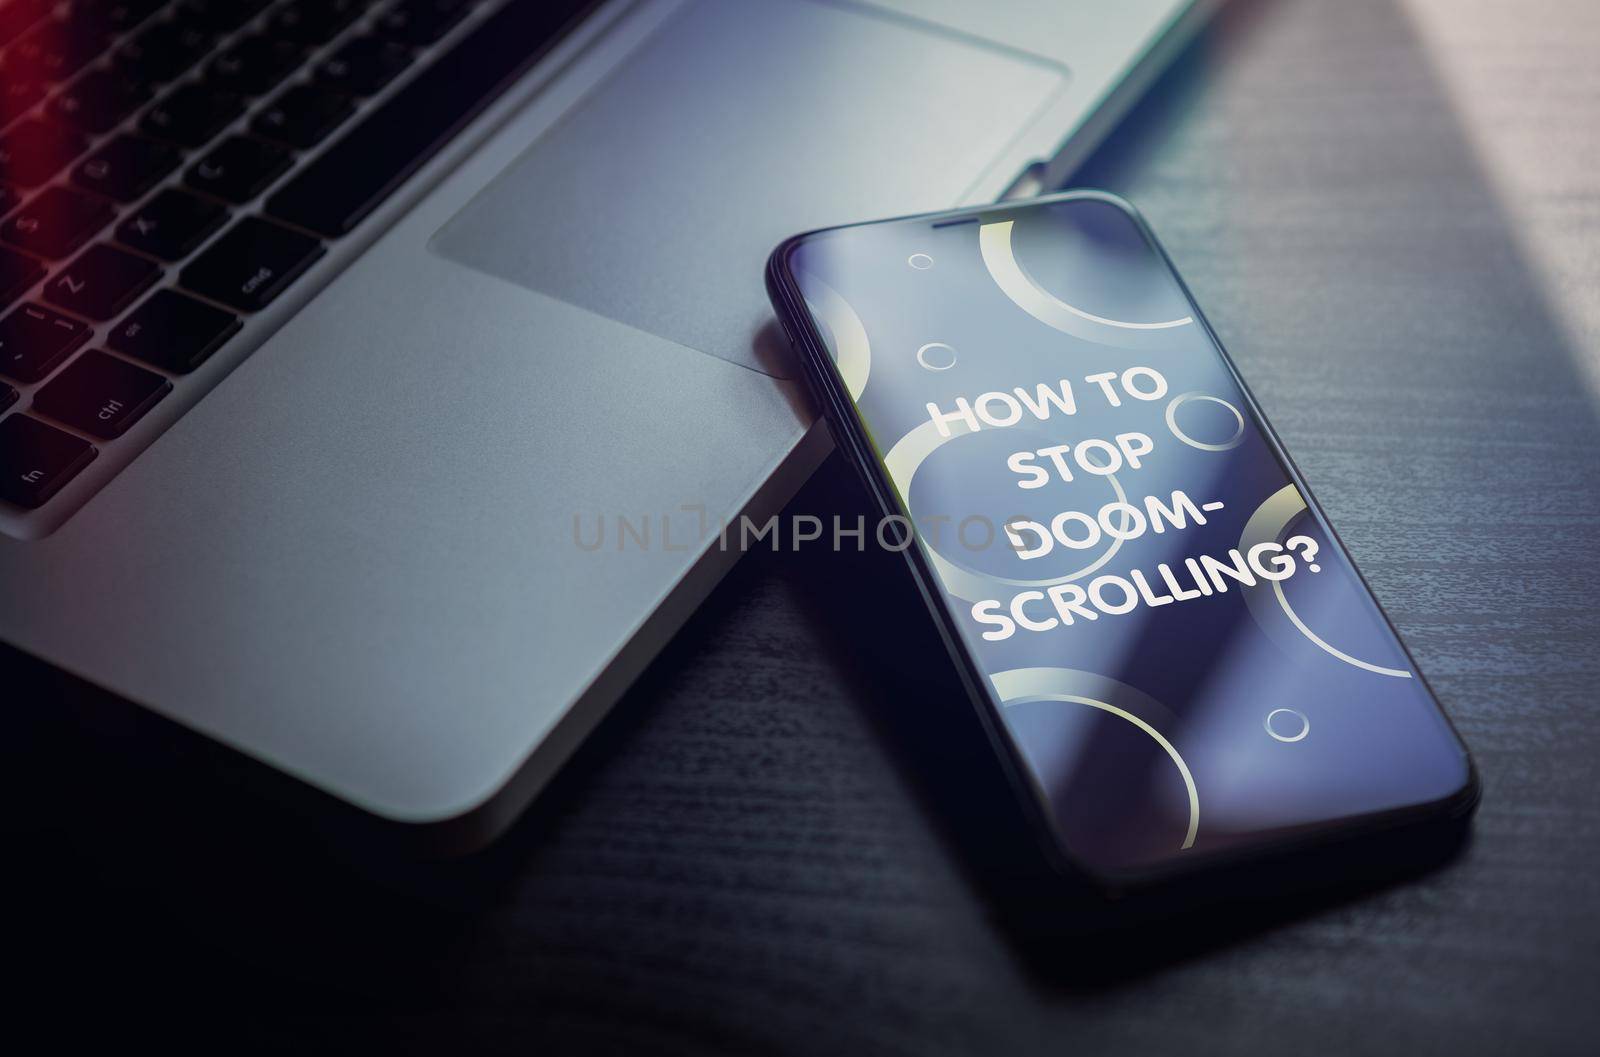 How to stop Doomscrolling - on the smartphone screen display concept by bestforbest